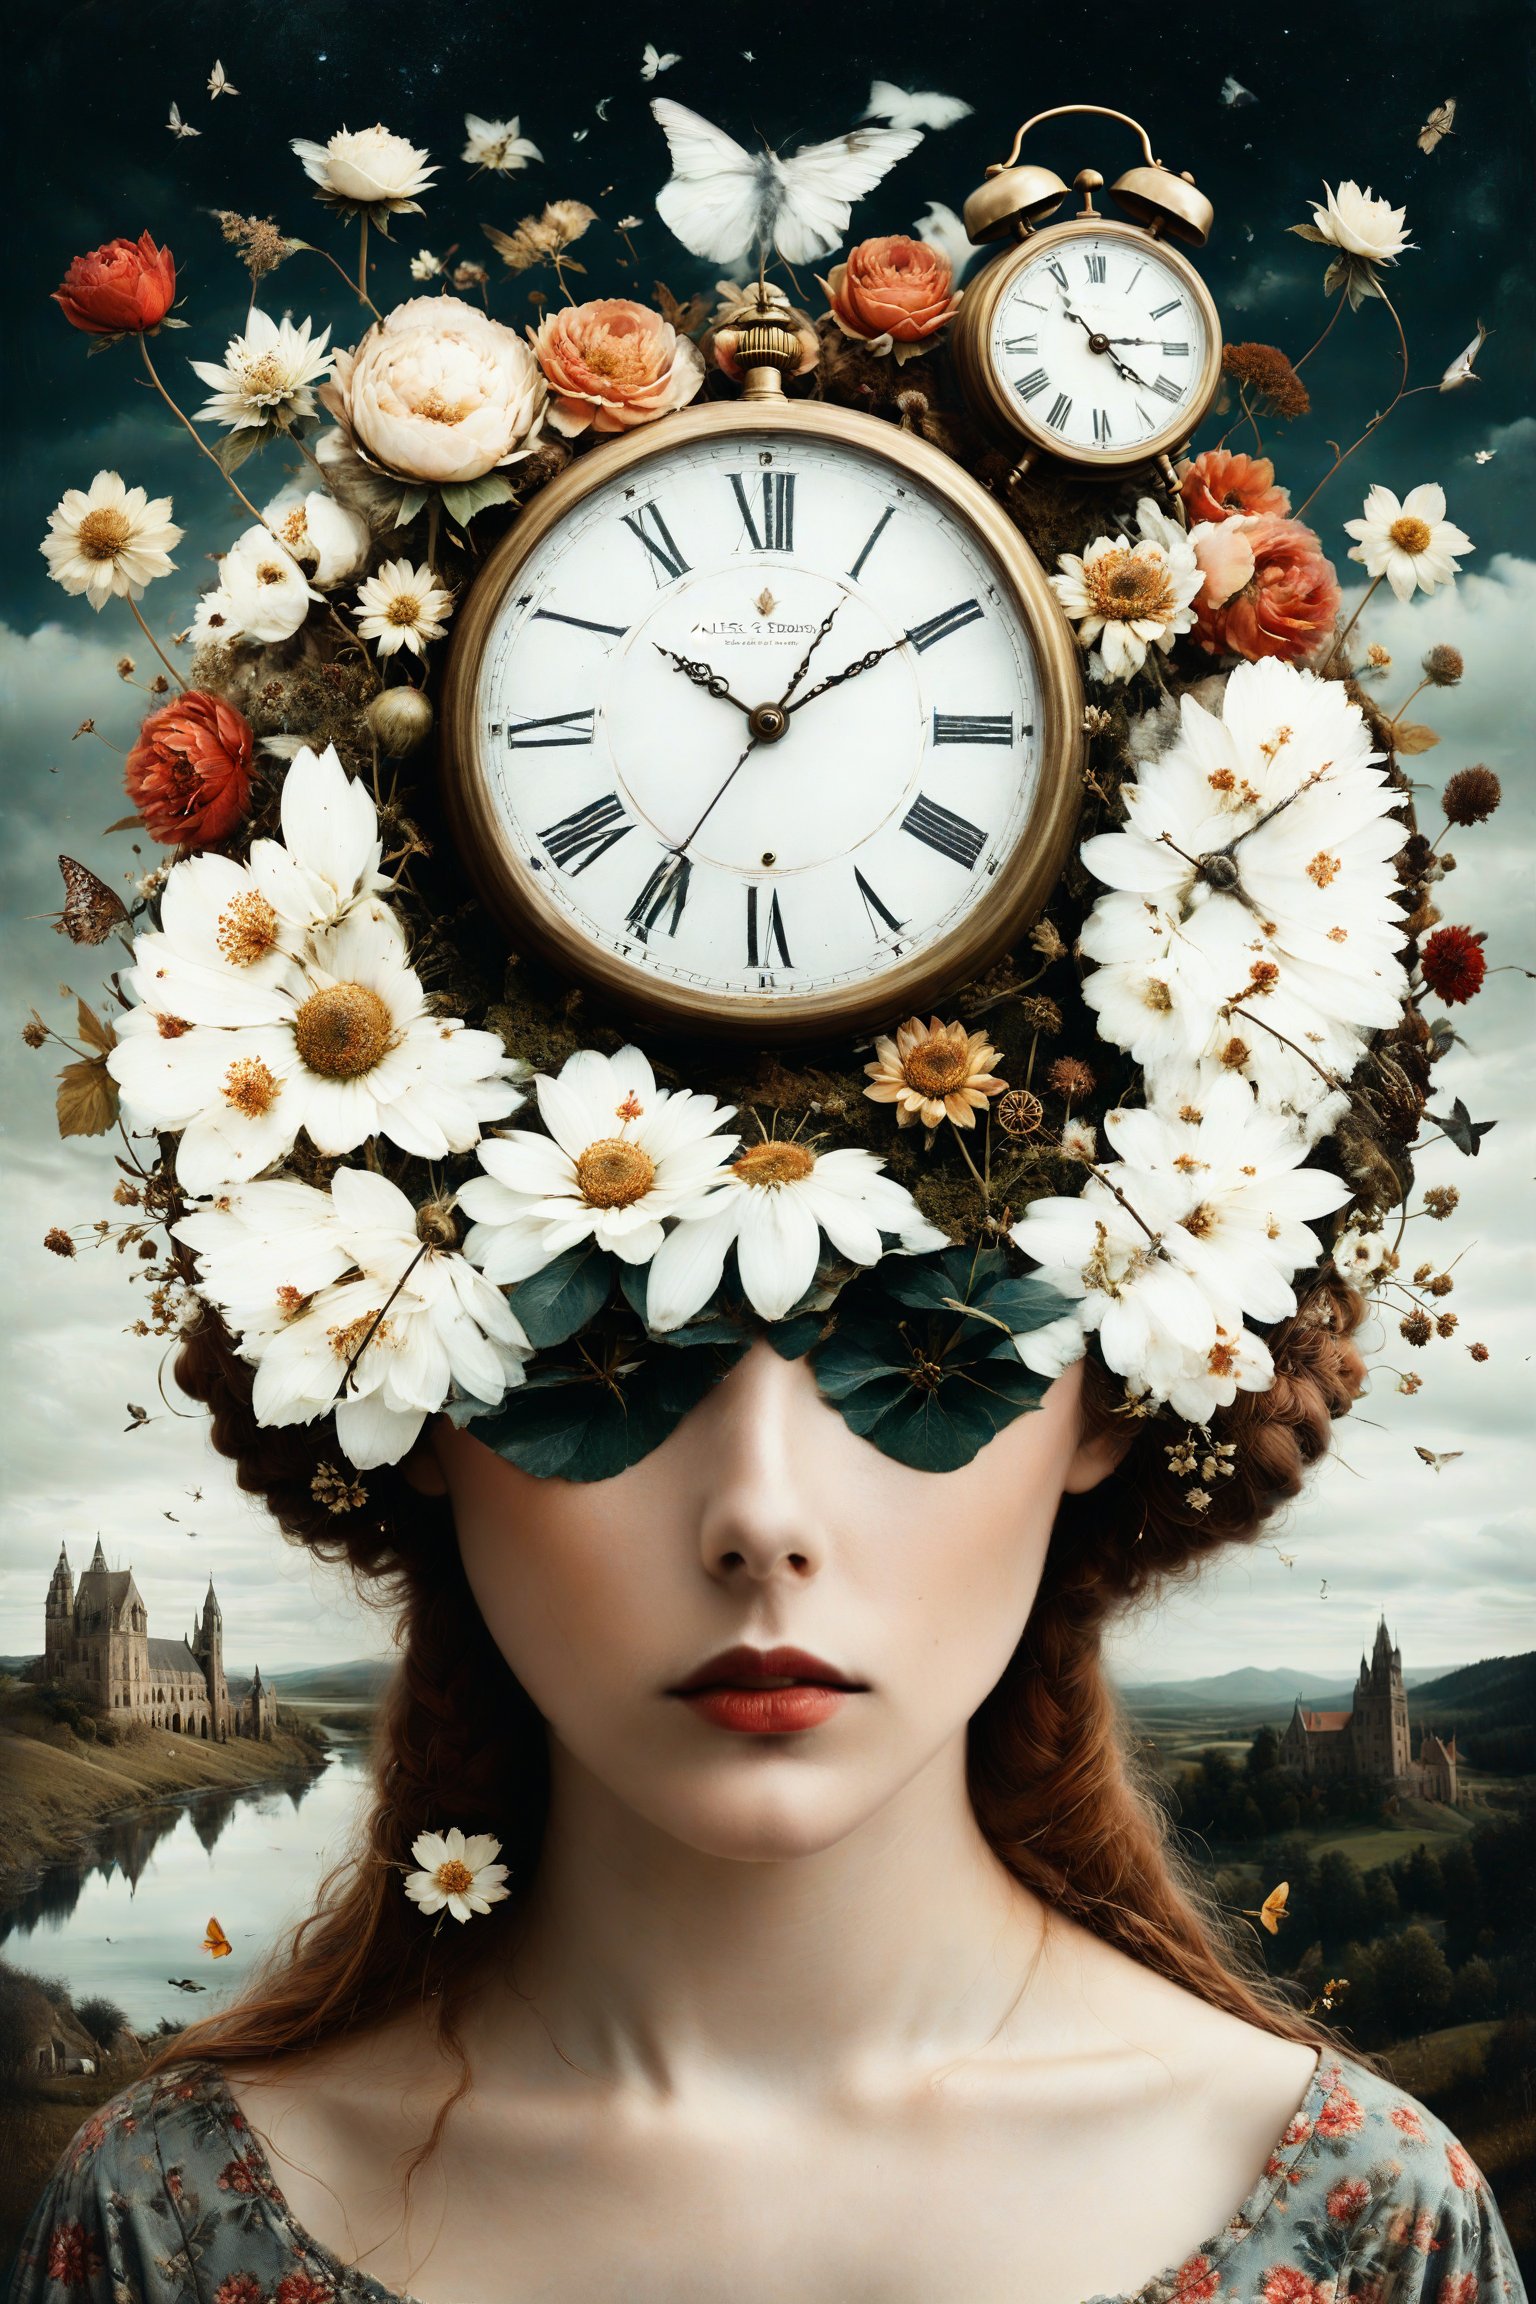 Generate an aesthetically fascinating collage artwork, complex double exposure art by Alex Stoddard, Natalia Drepina and Brooke Shaden, a surreal postcard. Double exposure of a woman with a clocks composition in her head, as a form of thoughts. long_exposure, long_exposure, flower, gbaywing